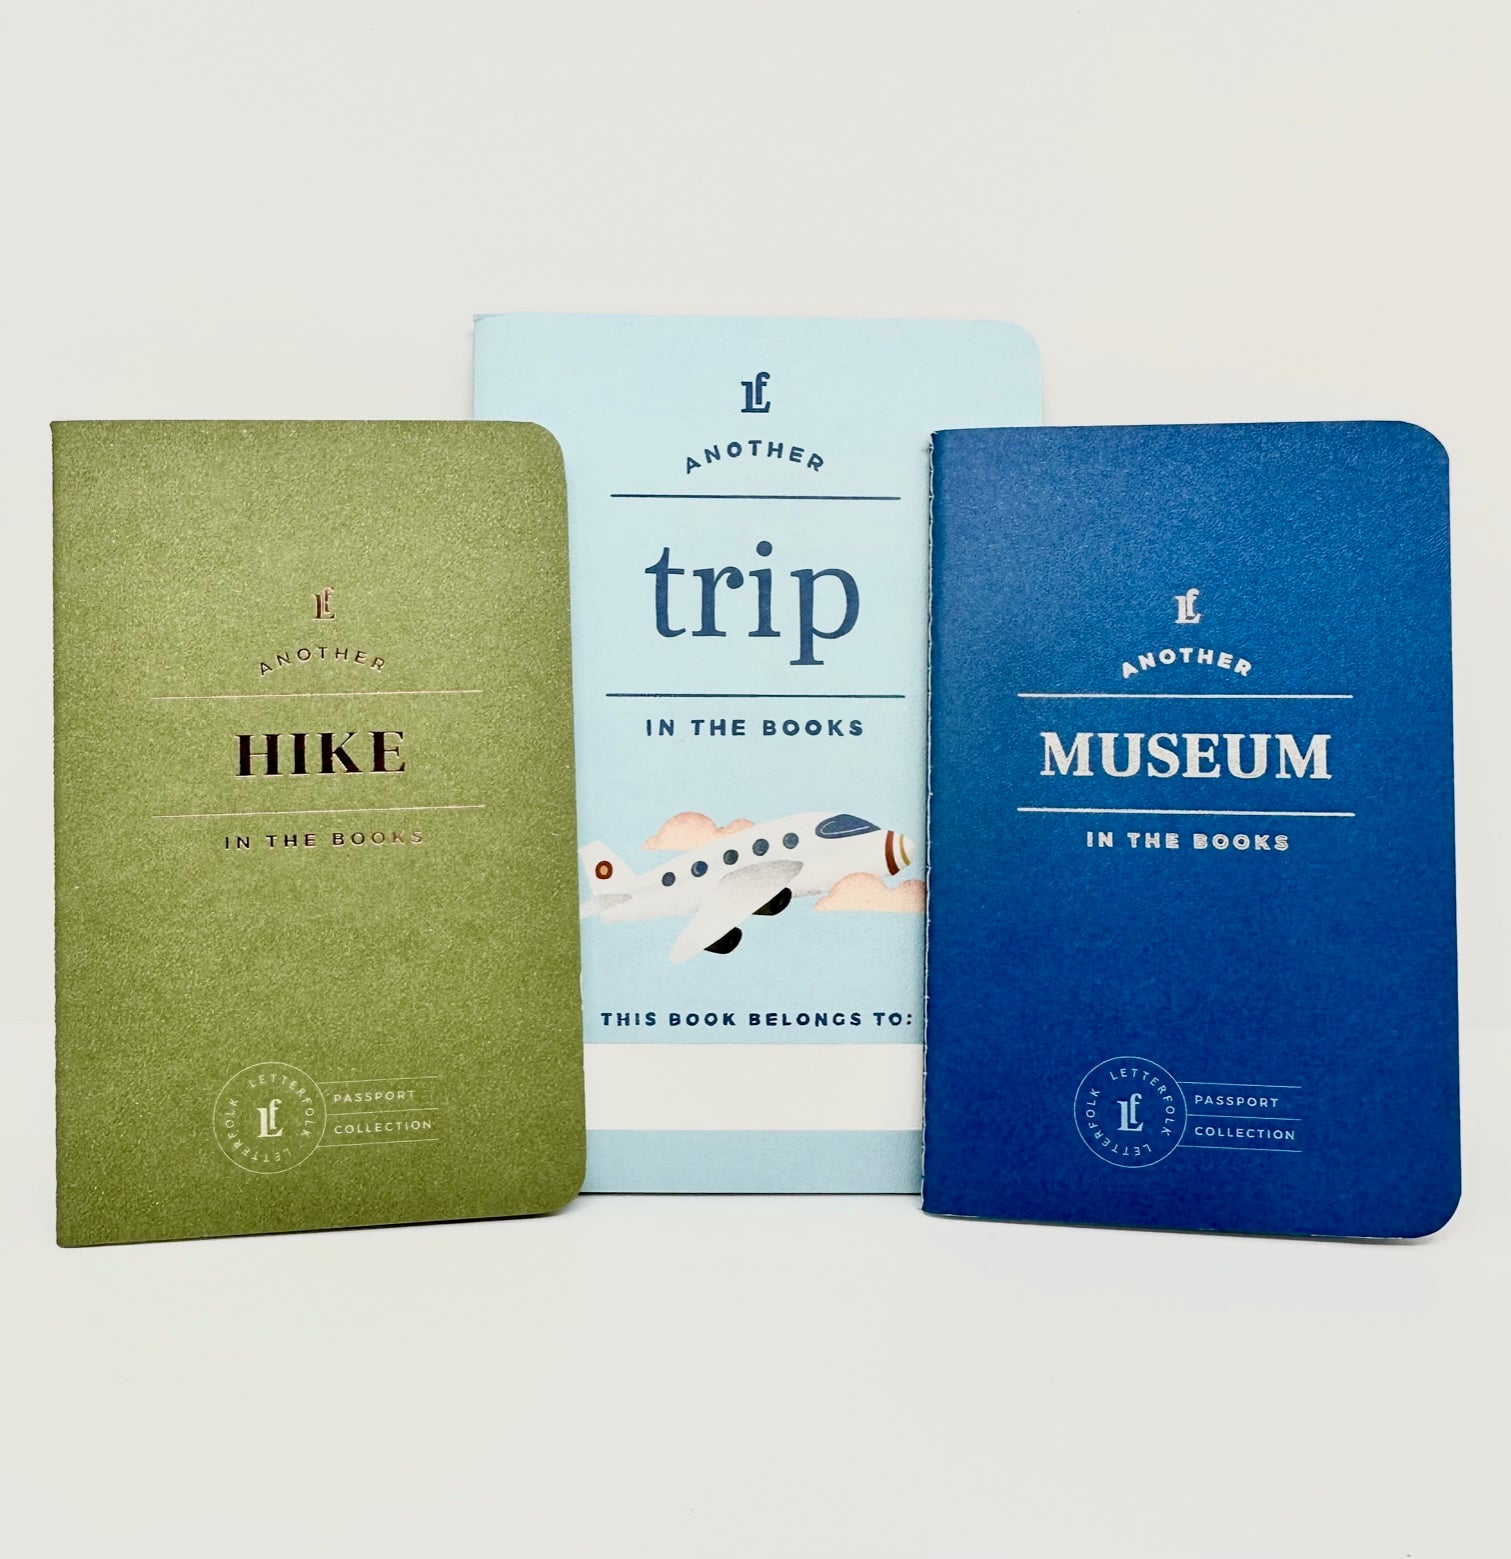 All three Passports for Experiences